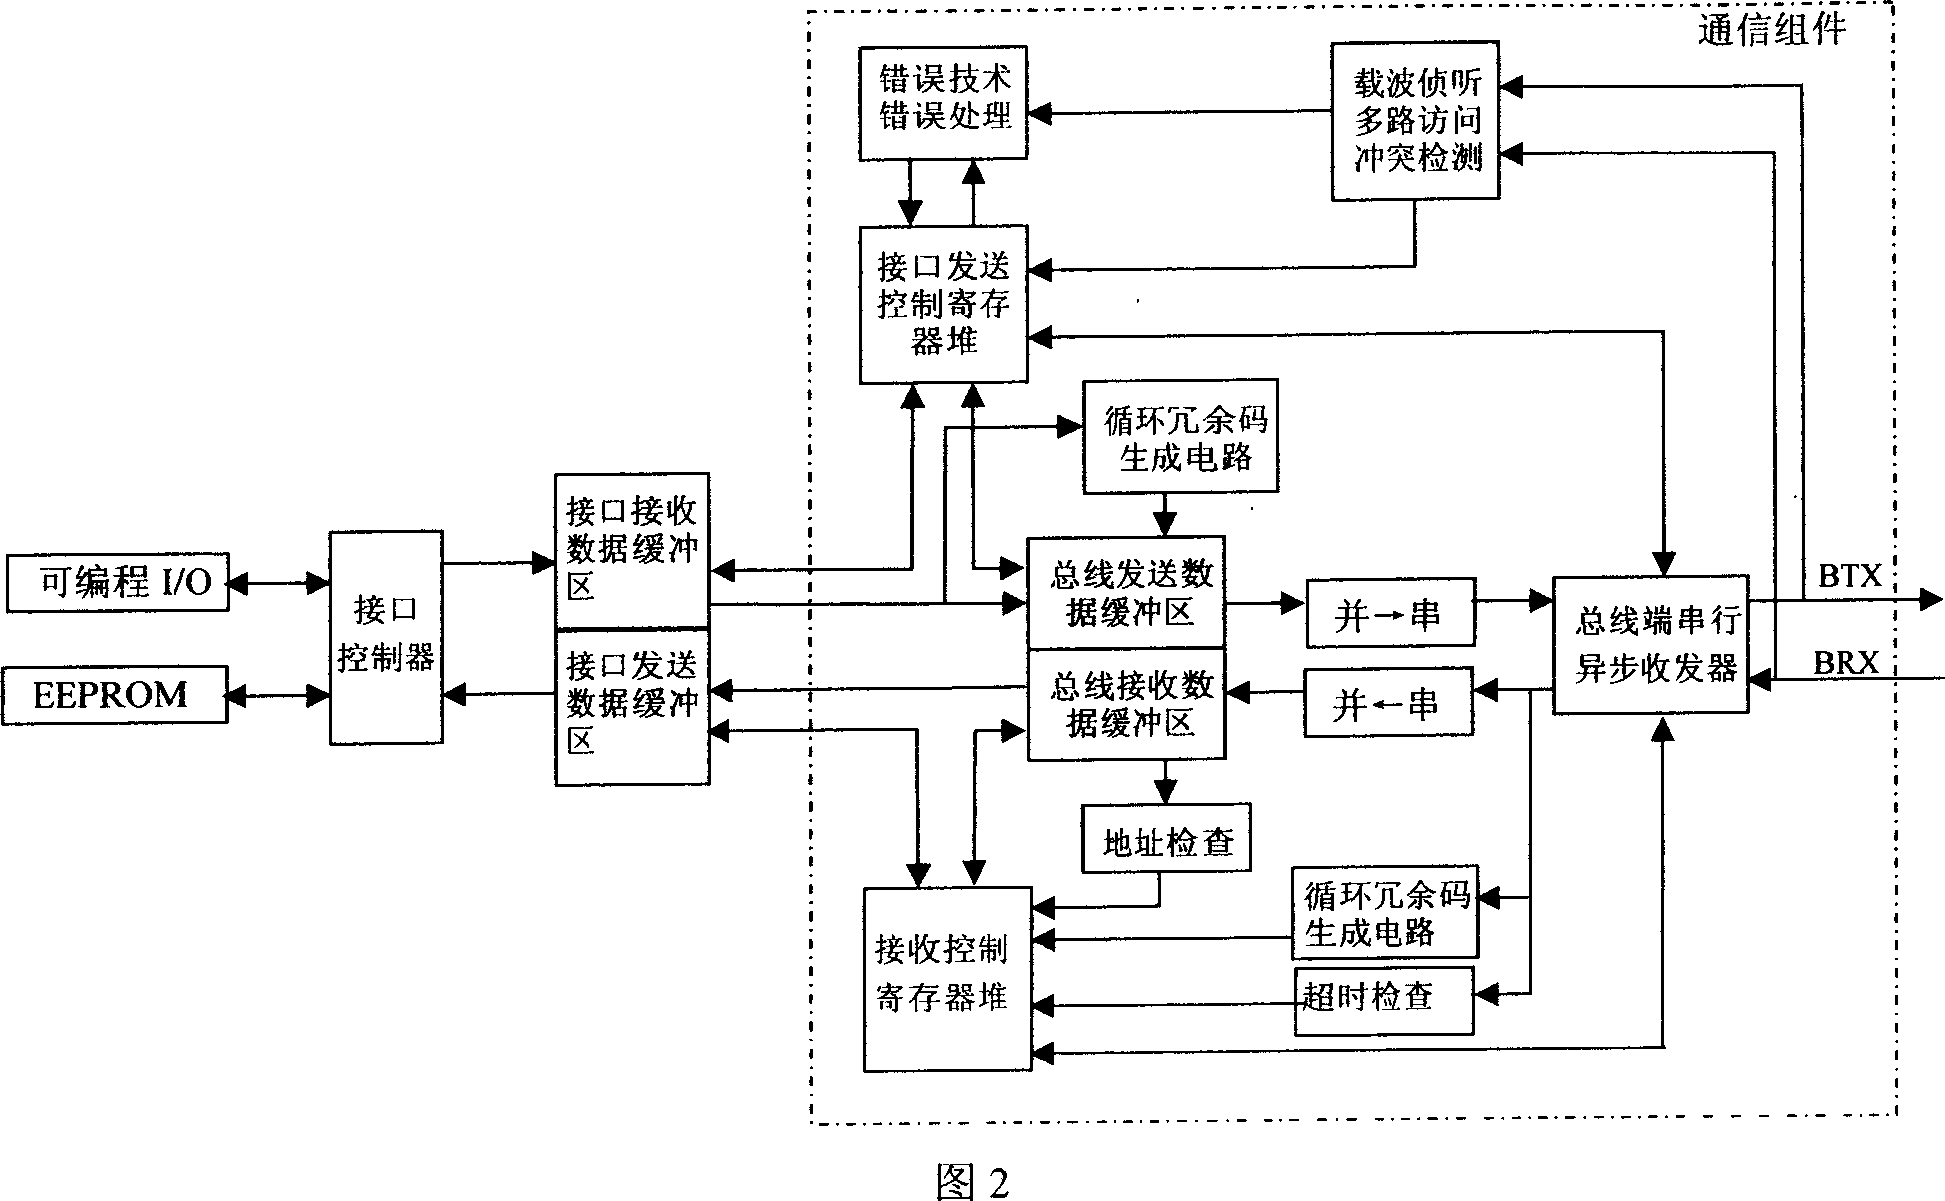 A readable-writable and programmable I/O interface controller/communication controller